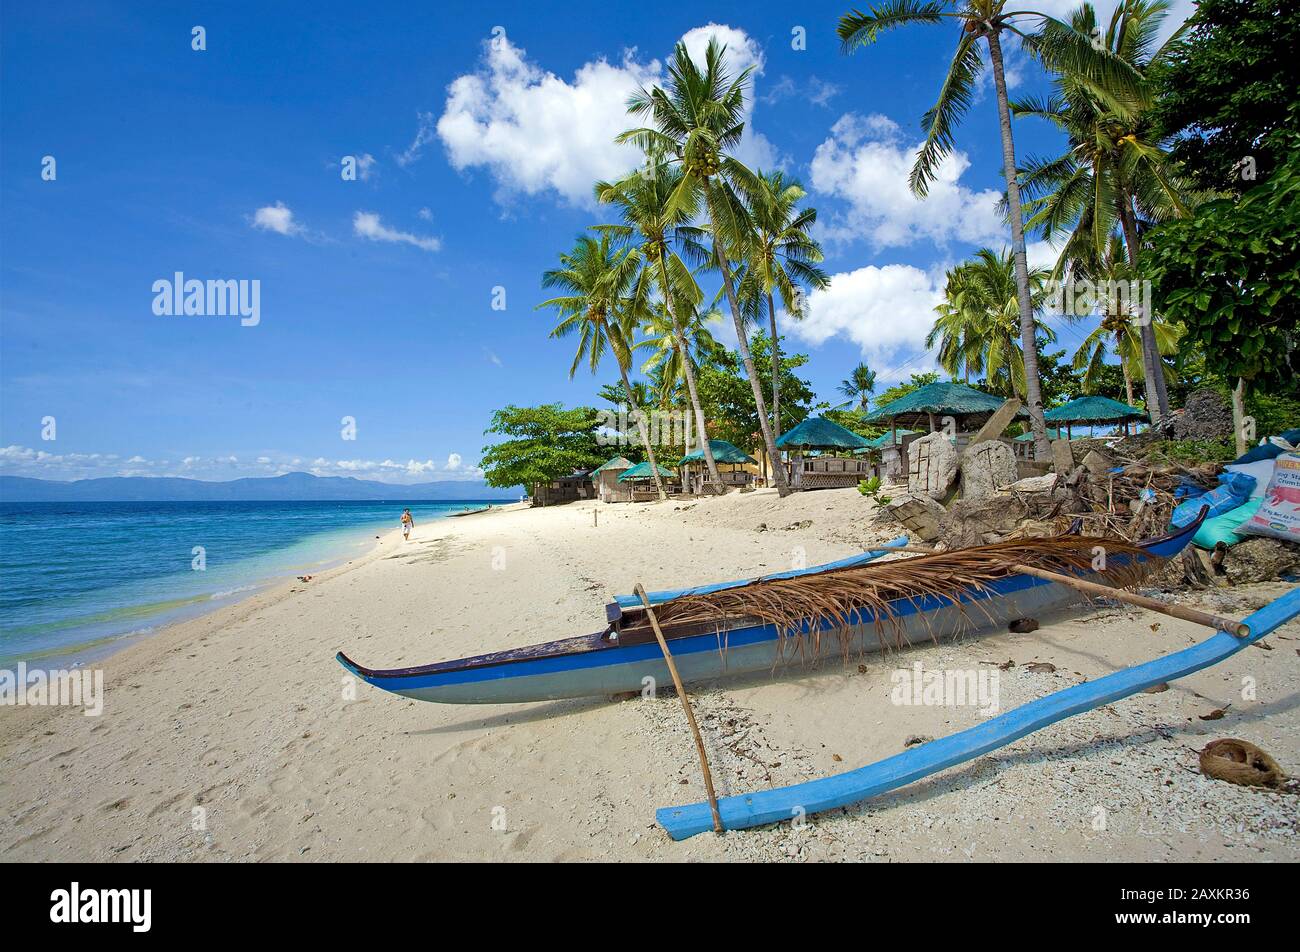 Kleines Auslegerboot am White Beach, Moalboal, Cebu, Philippinen | Small outrigger boat at White beach, Moalboal, Cebu, Philippines Stock Photo